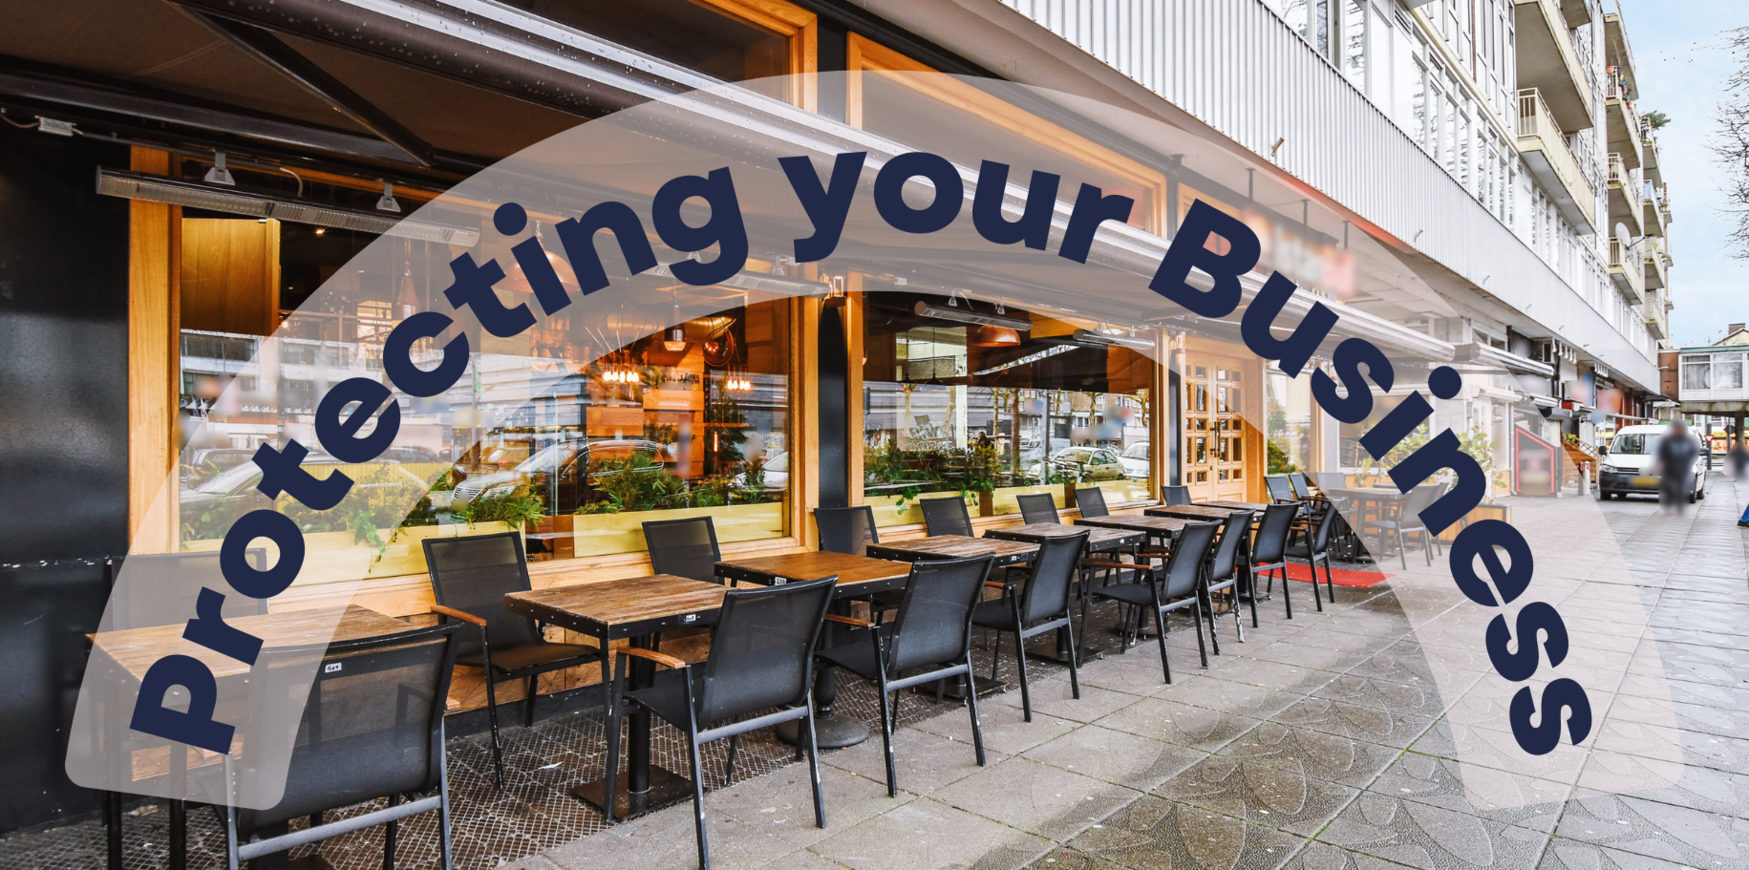 Storefront of a restaurant with patio seating with "Protecting your Business" written across the photo